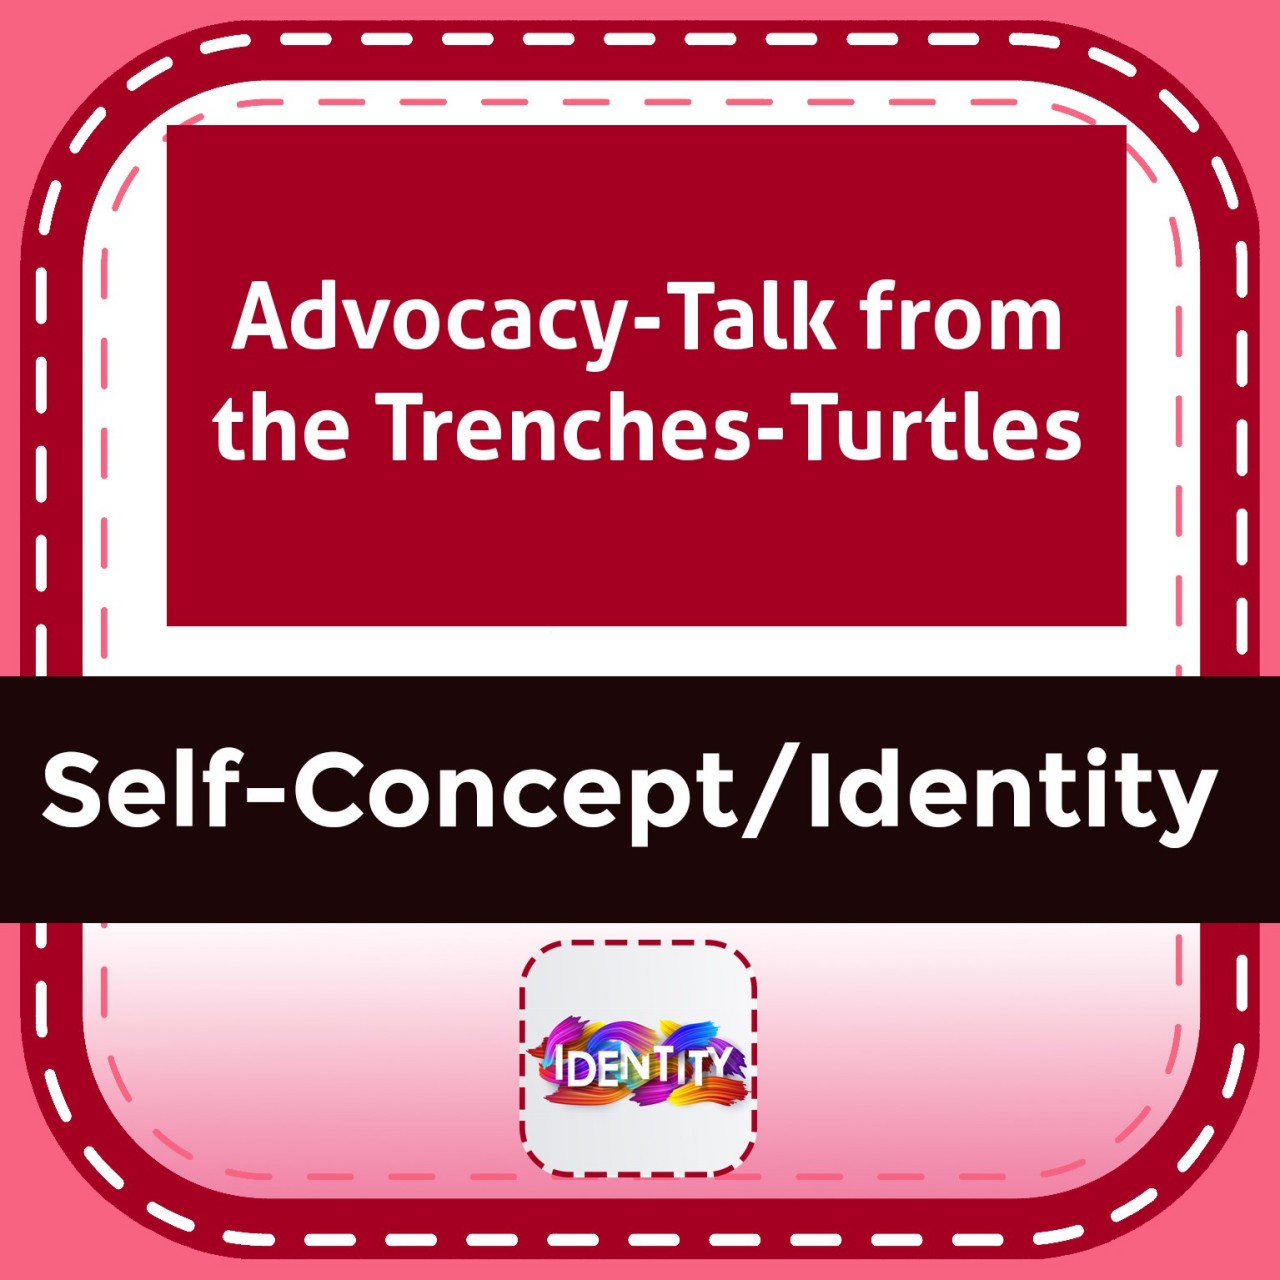 Advocacy-Talk from the Trenches-Turtles